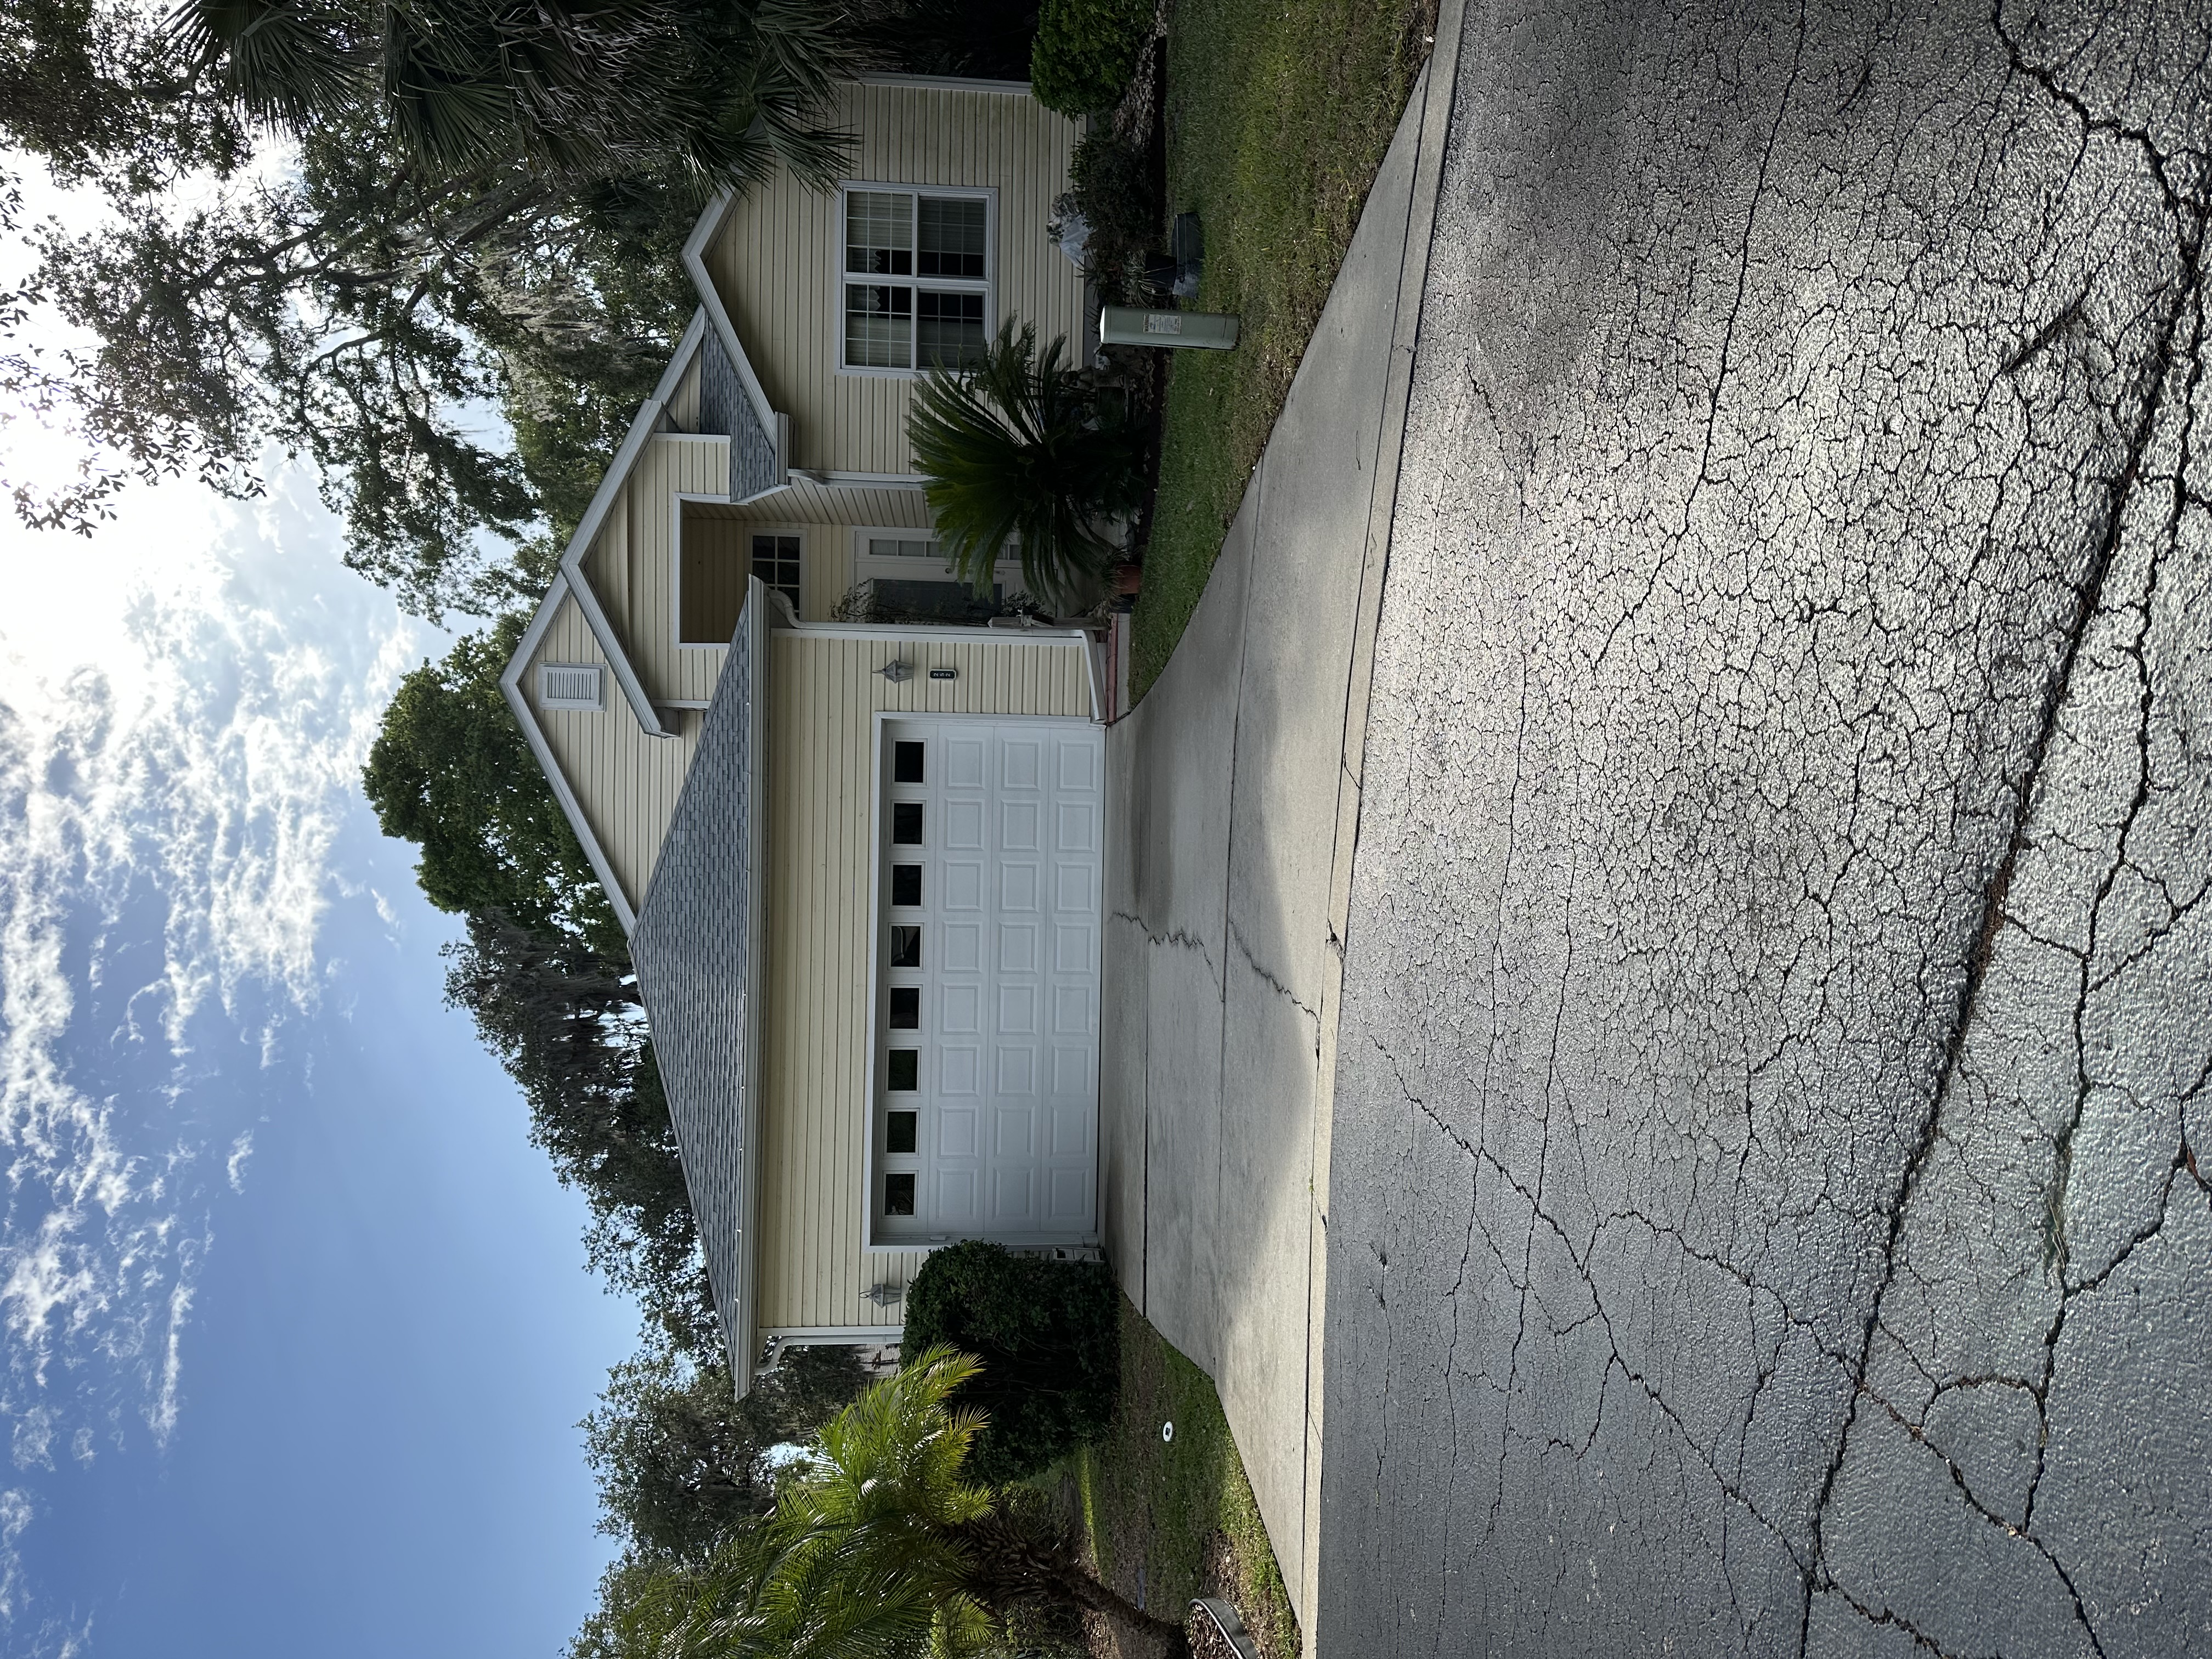 House wash & driveway cleaning in Debary, FL